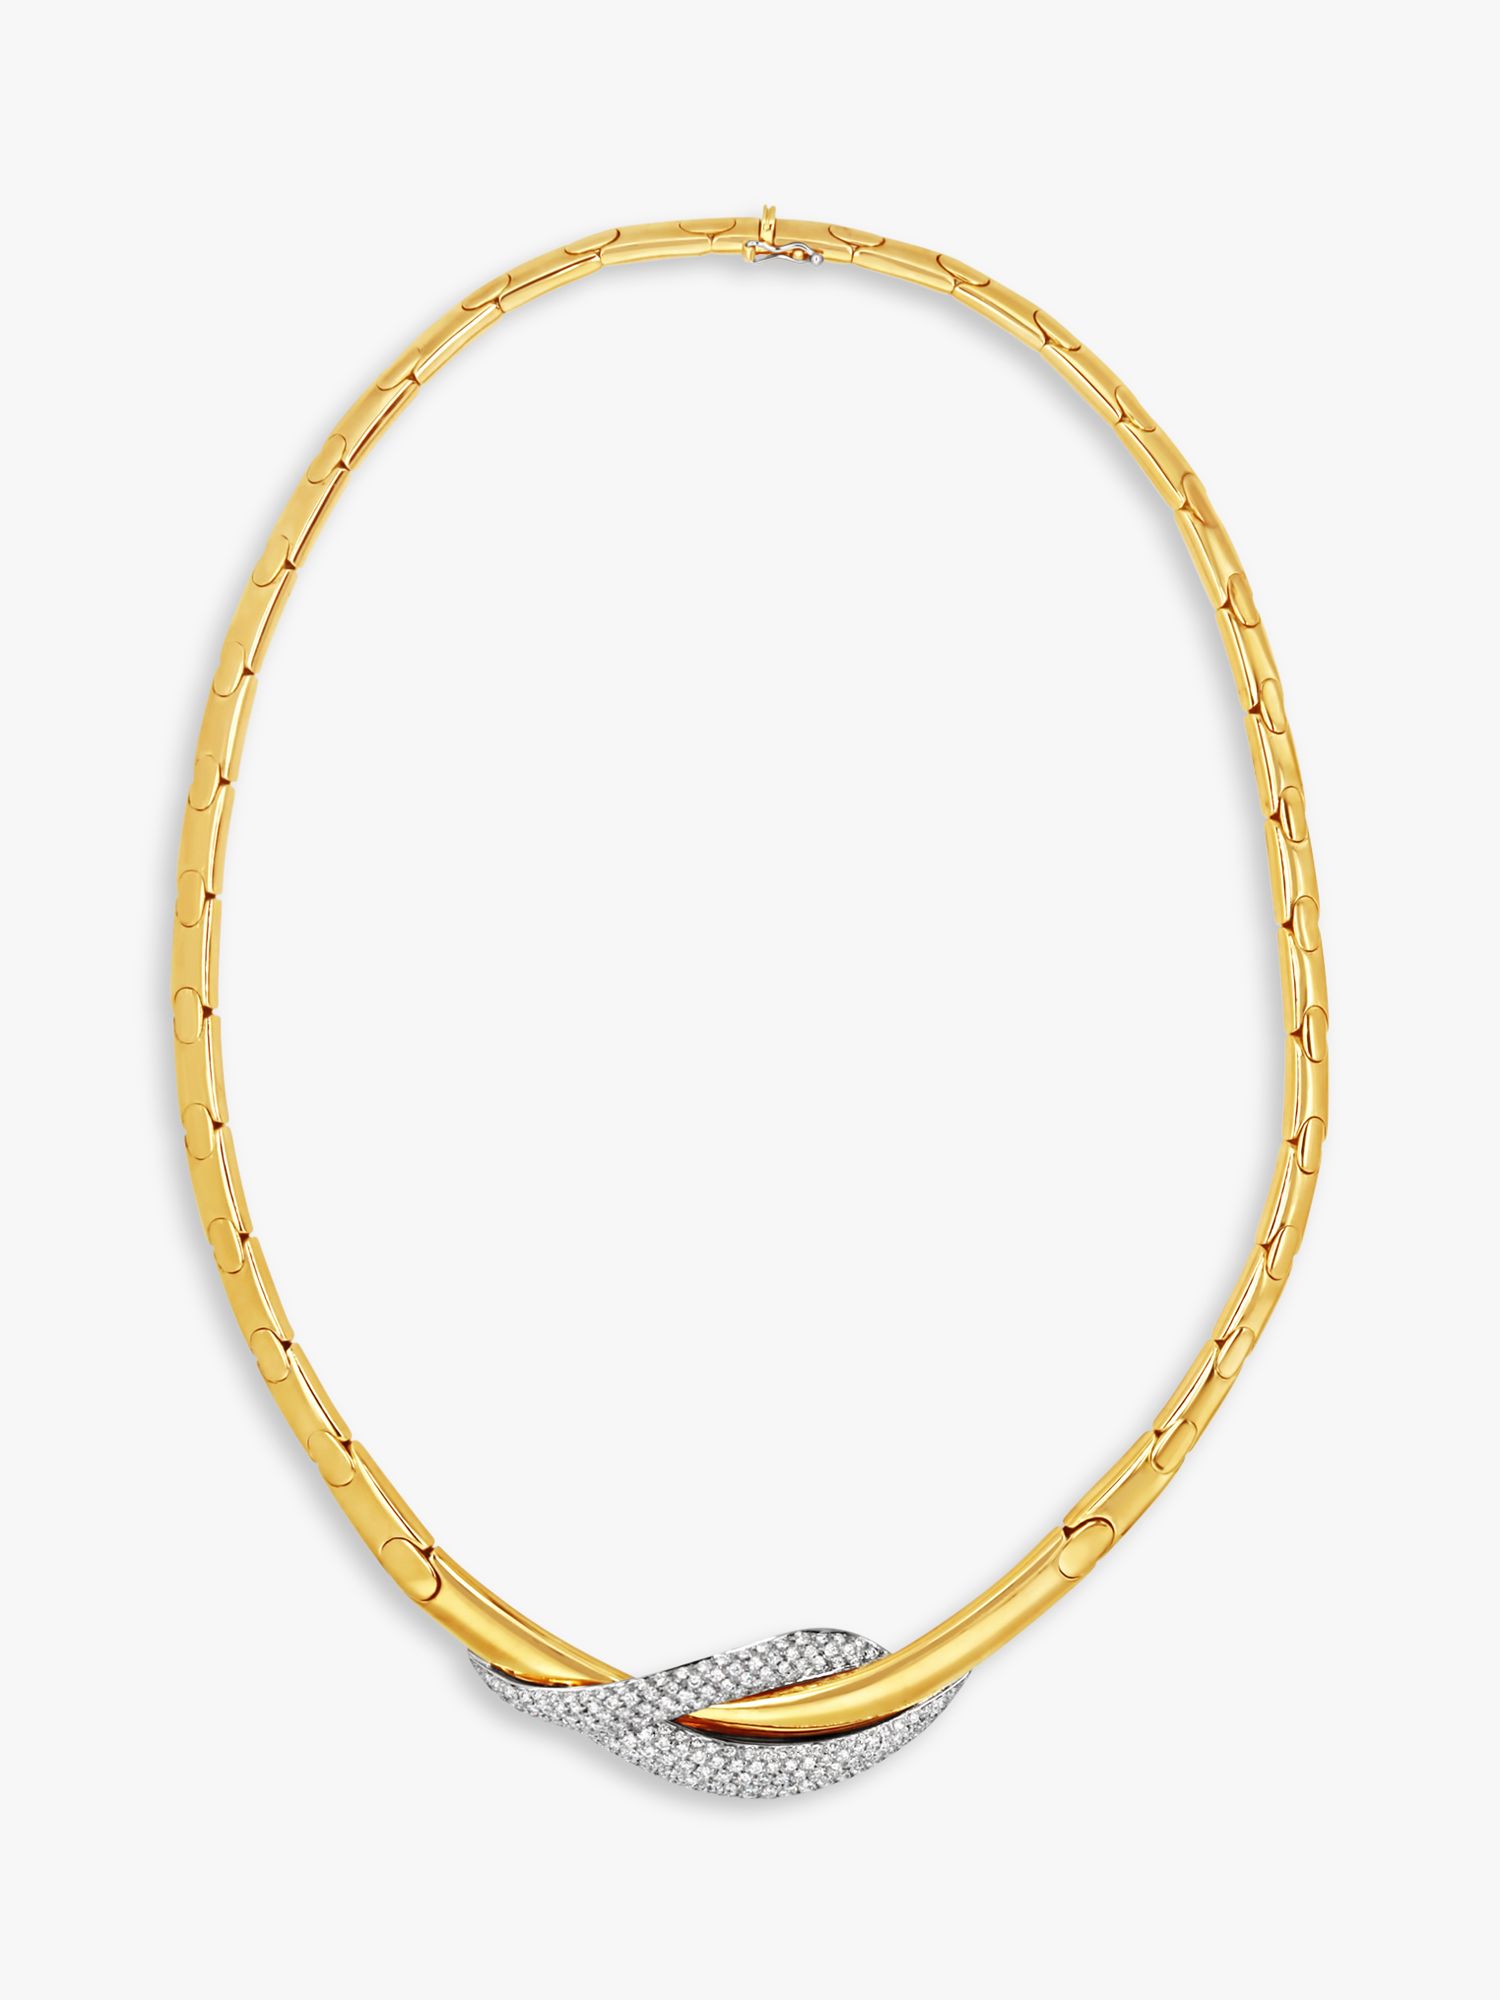 Buy Milton & Humble Jewellery Second Hand Wempe 18ct Gold Pave Diamond Collarette Necklace, Gold Online at johnlewis.com